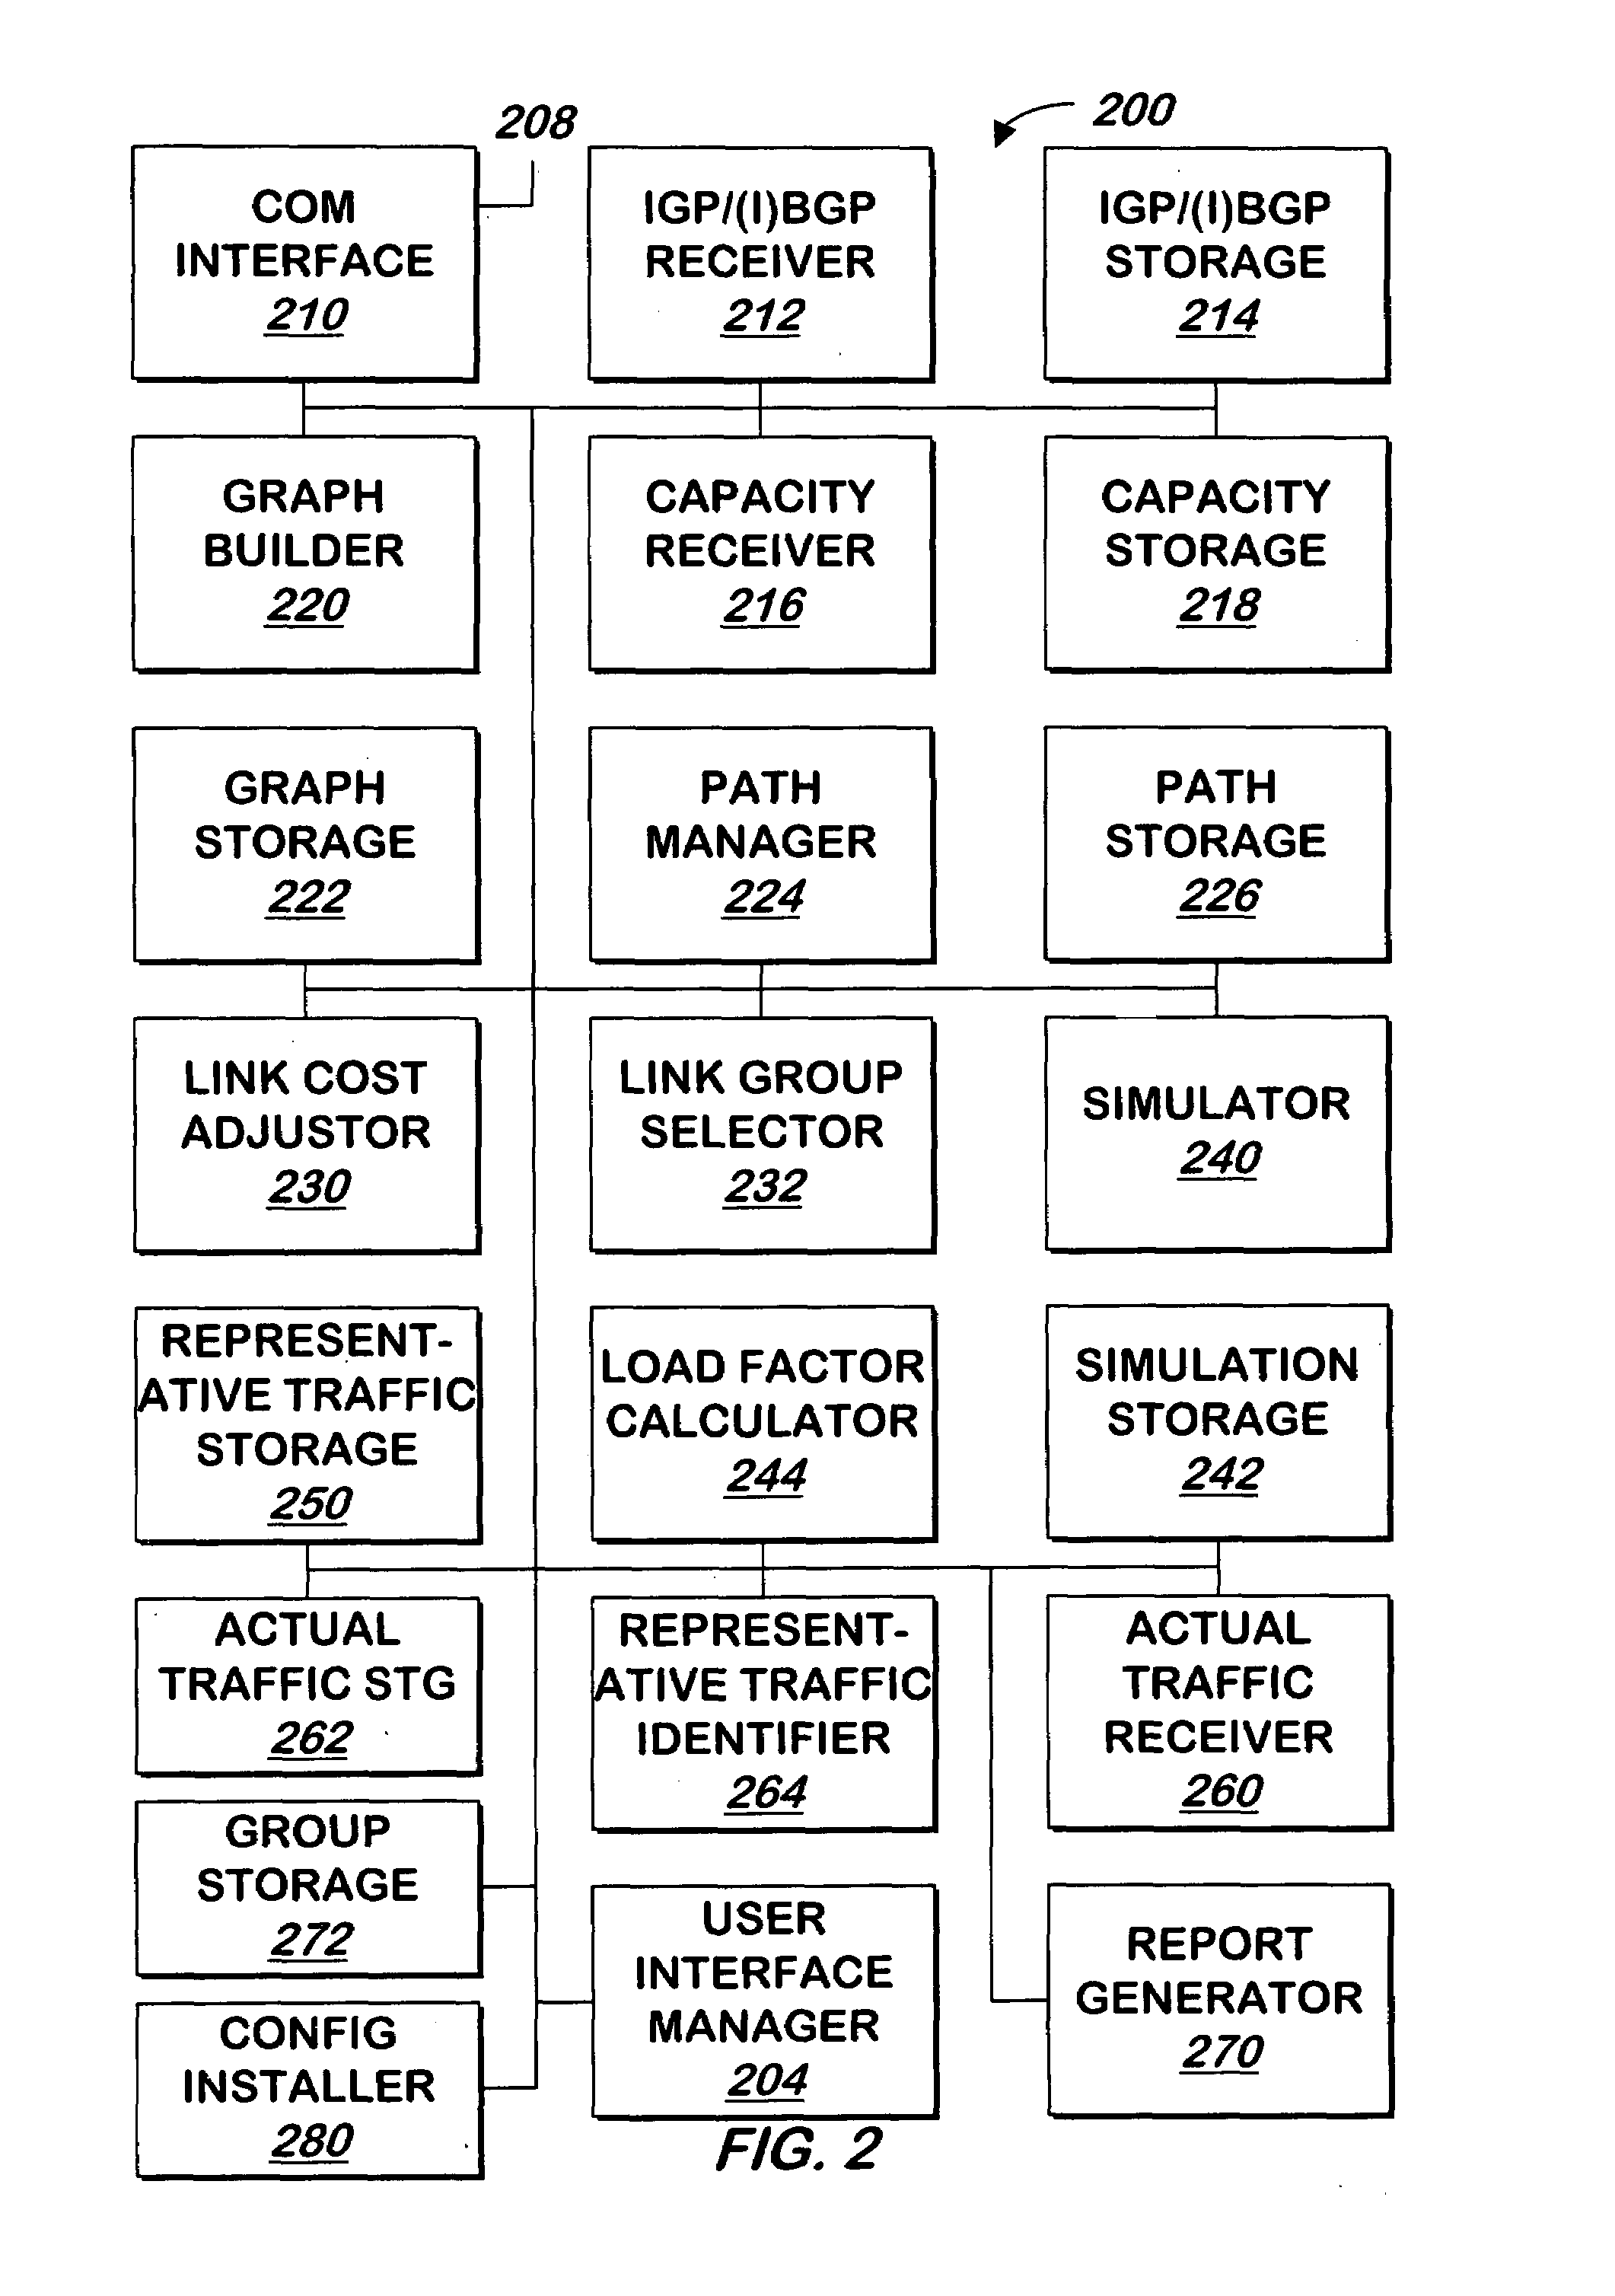 System and method for identifying cost metrics for a network